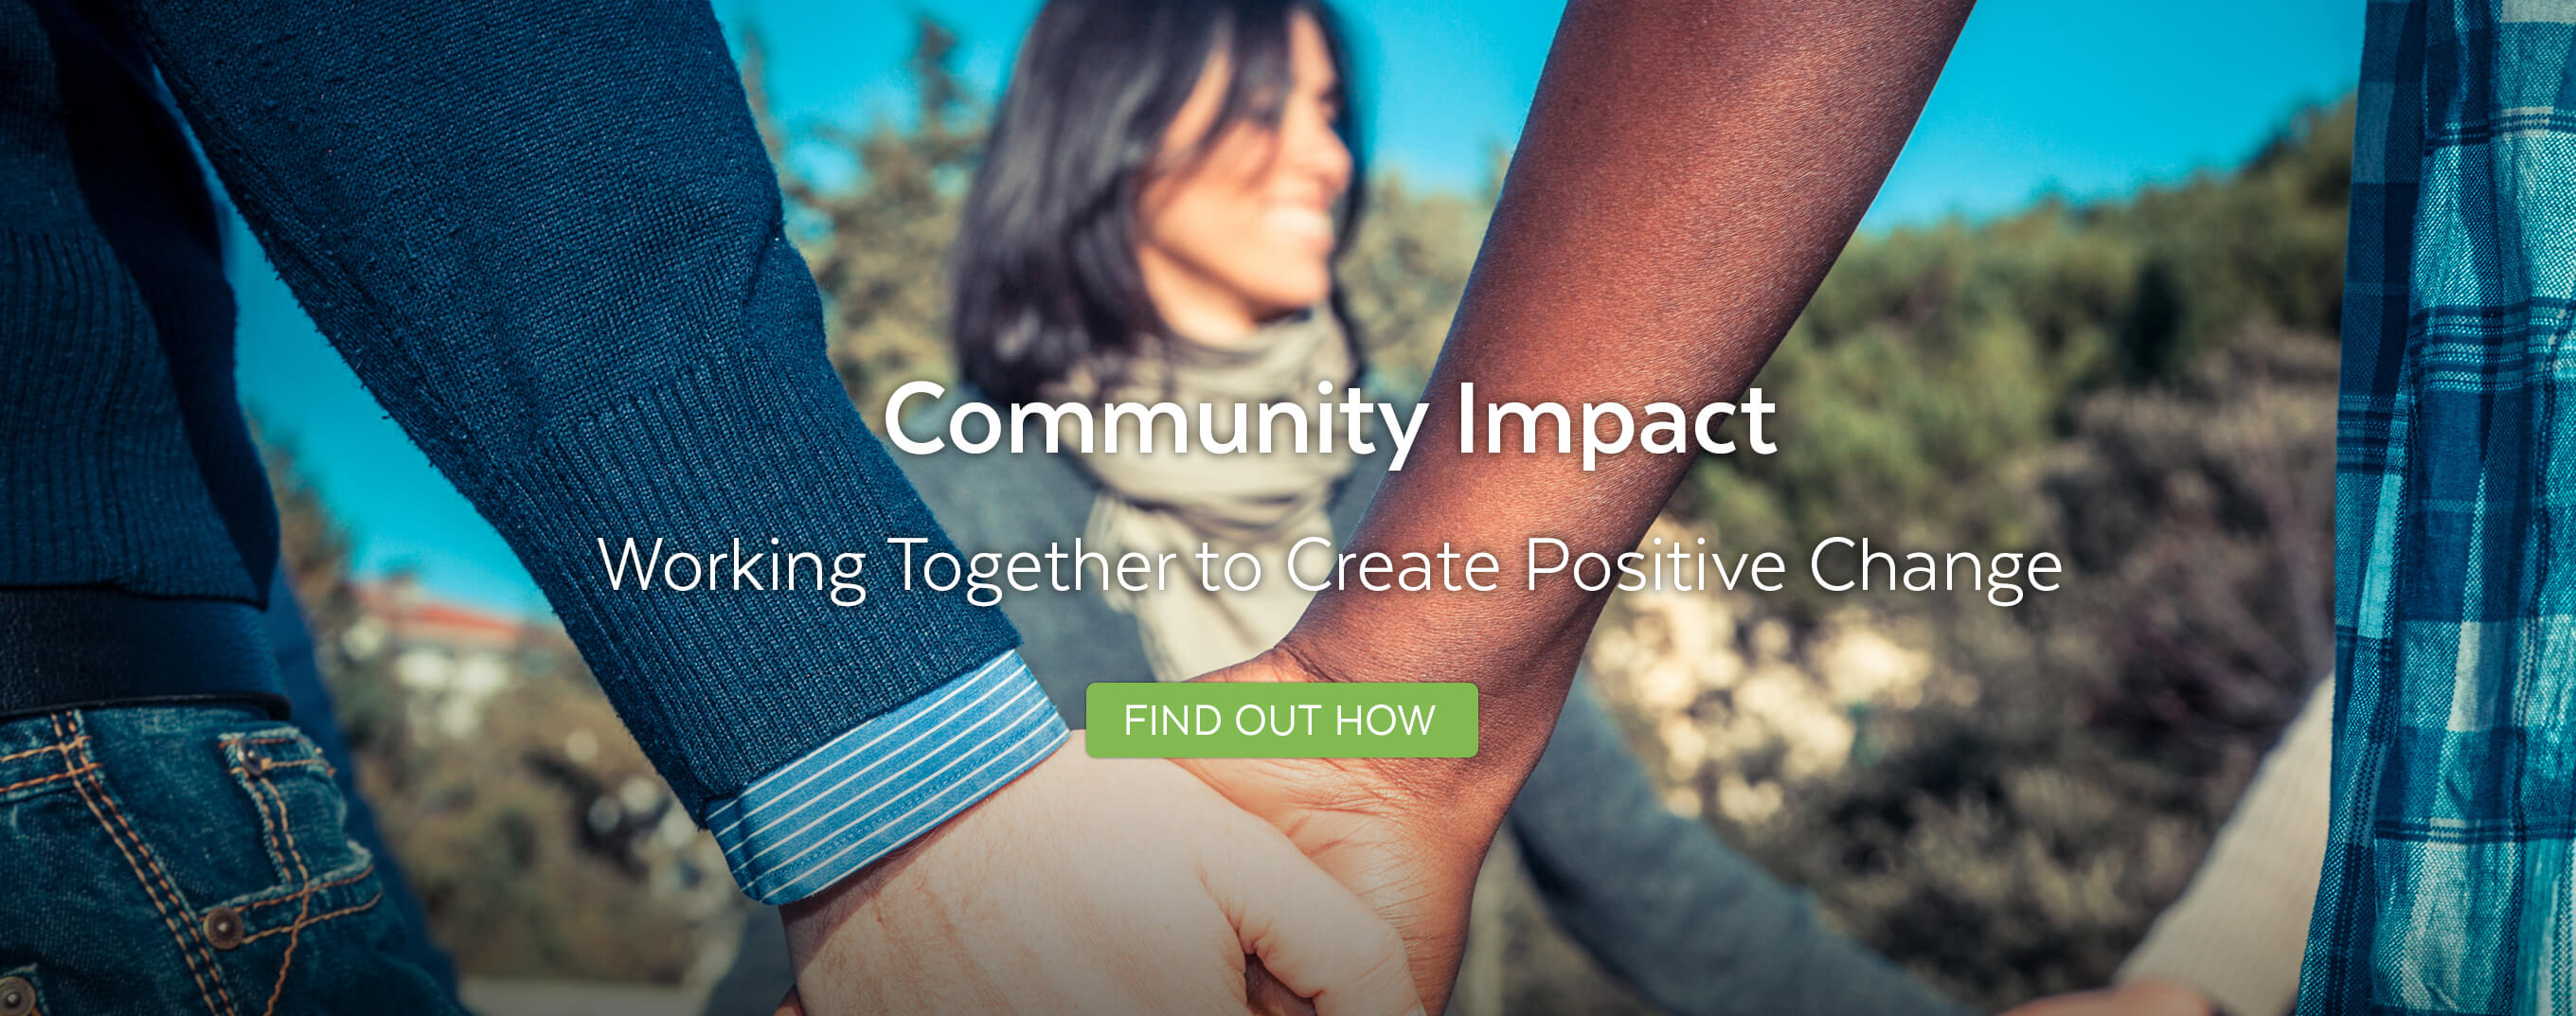 Nusenda Foundation is working with community organizations to create positive change.